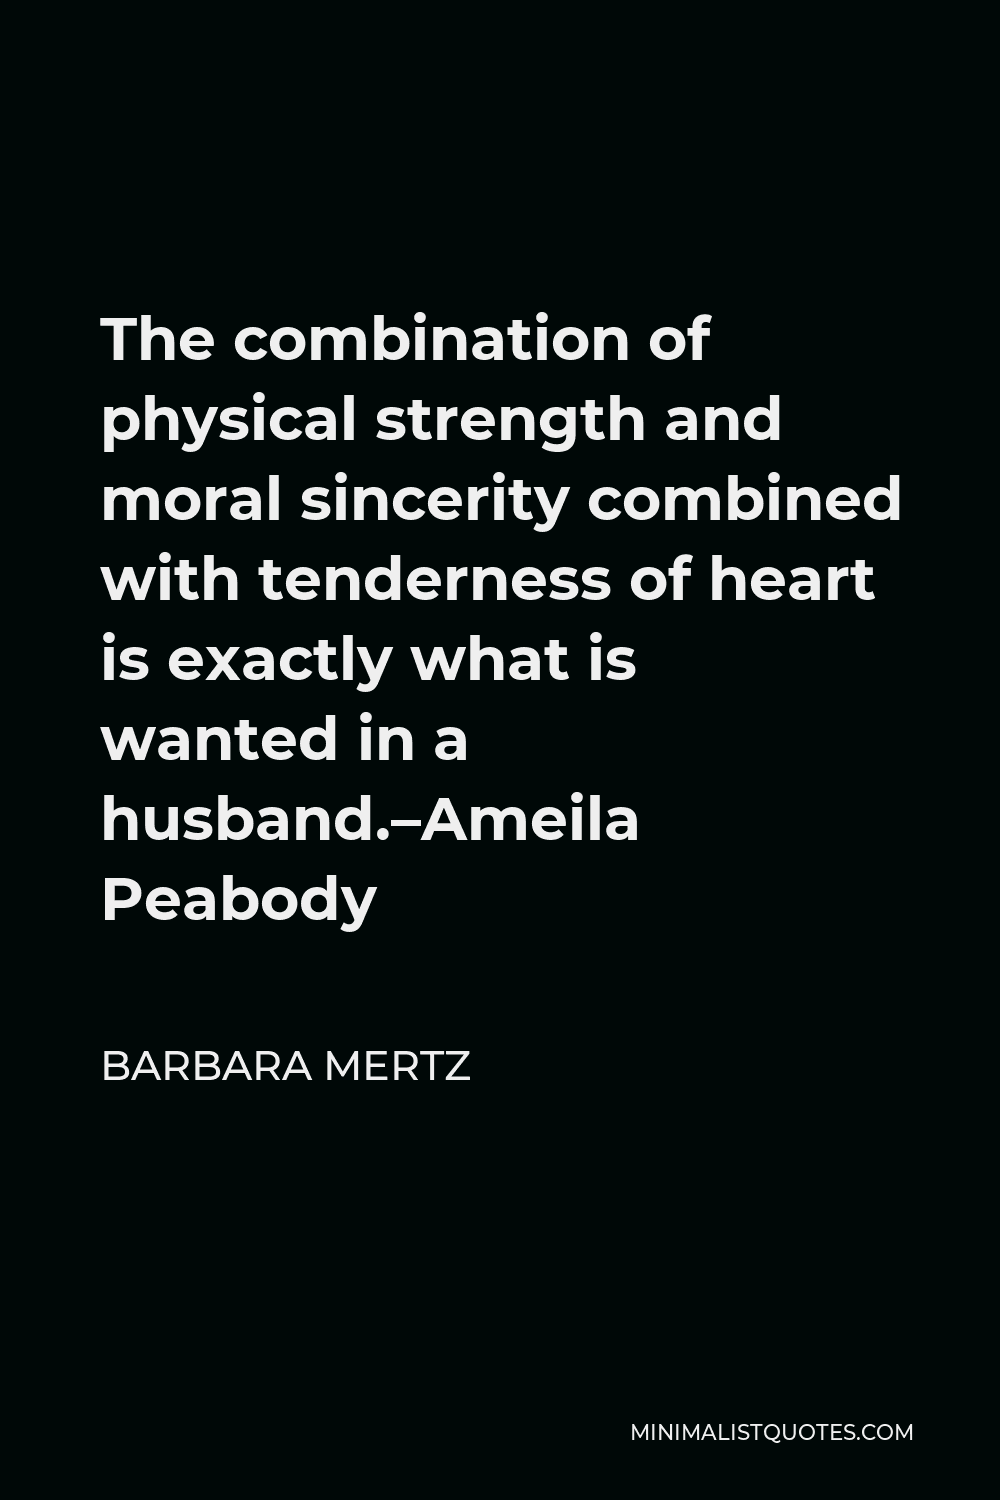 Barbara Mertz Quote - The combination of physical strength and moral sincerity combined with tenderness of heart is exactly what is wanted in a husband.–Ameila Peabody